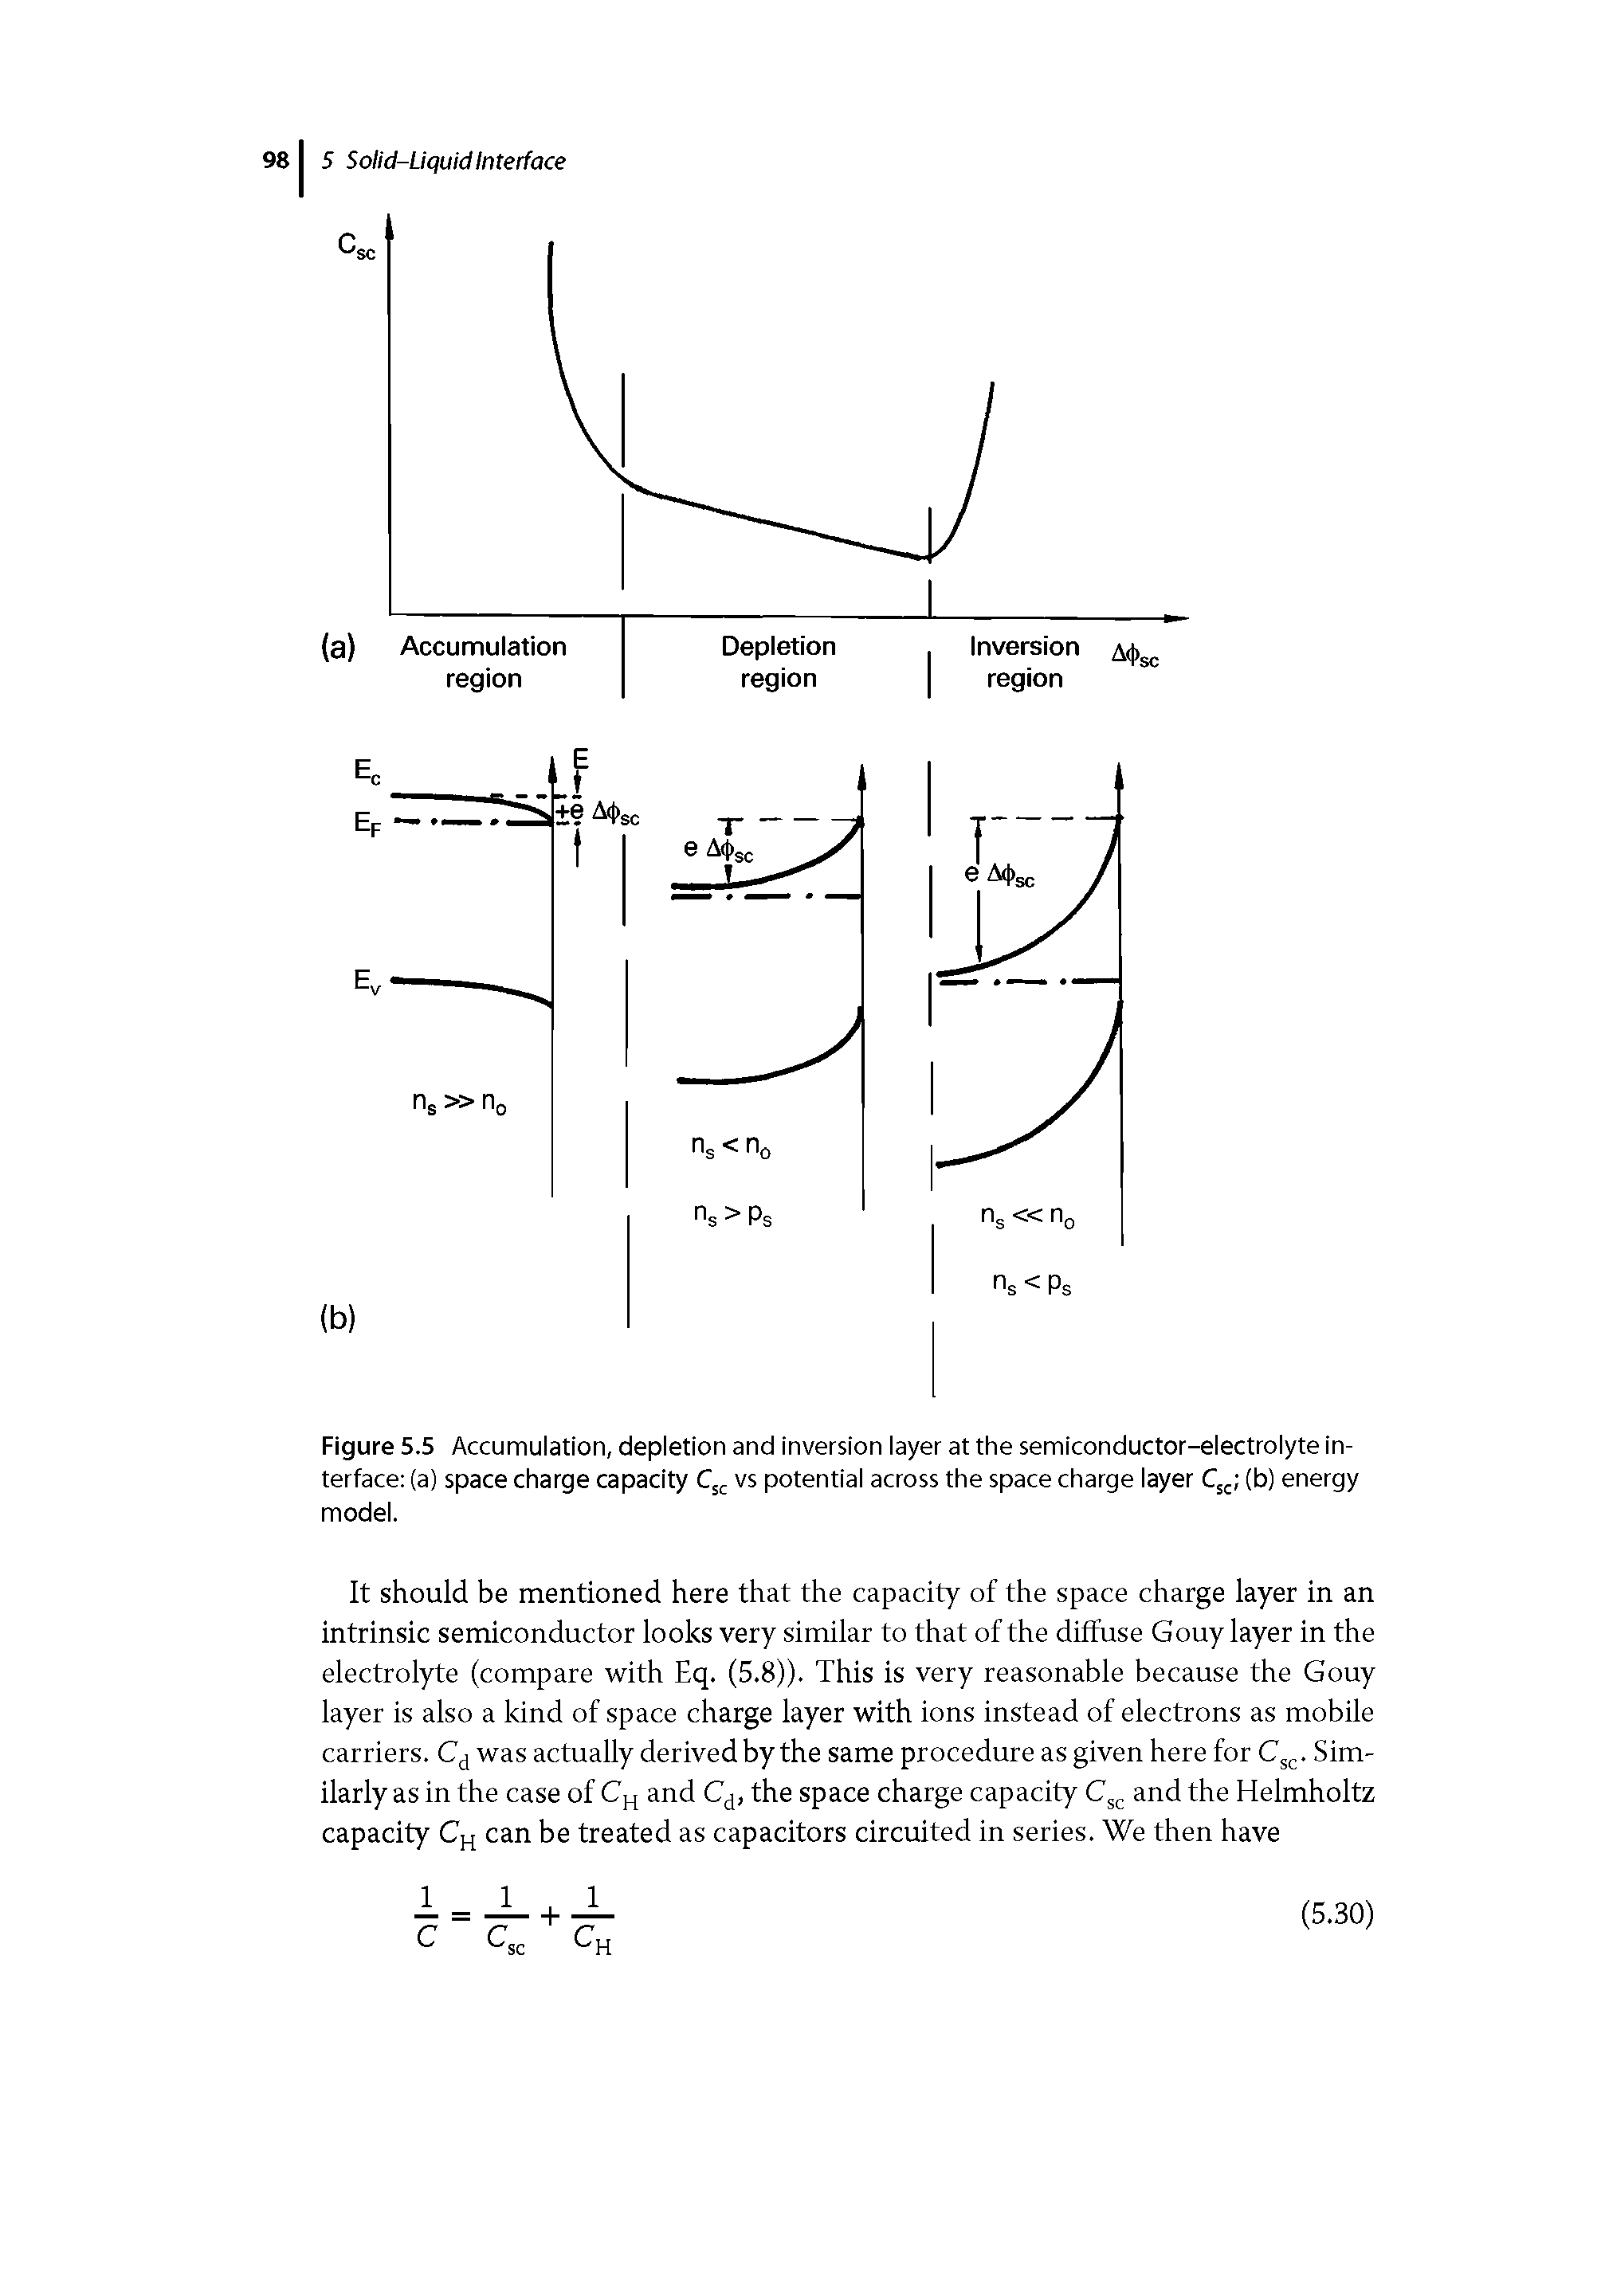 Figure 5.5 Accumulation, depletion and inversion layer at the semiconductor-electrolyte interface (a) space charge capacity vs potential across the space charge layer Q (b) energy model.